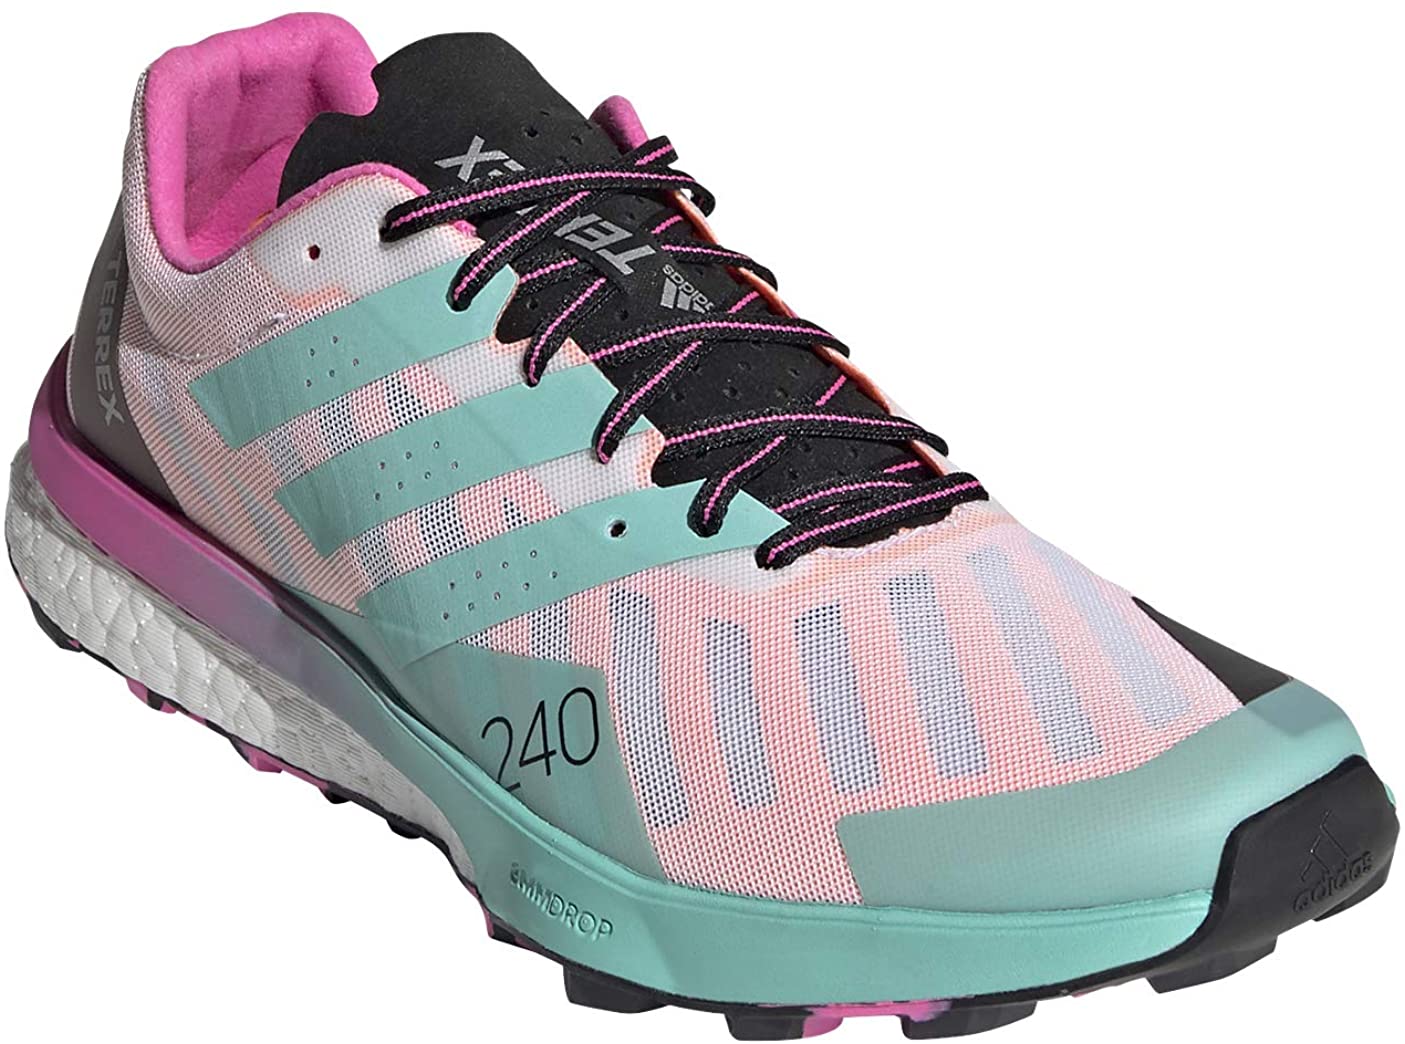 Women's adidas Terrex Speed Ultra Trail Running Shoe Cloud White/Acid Mint/Screaming Pink from the front